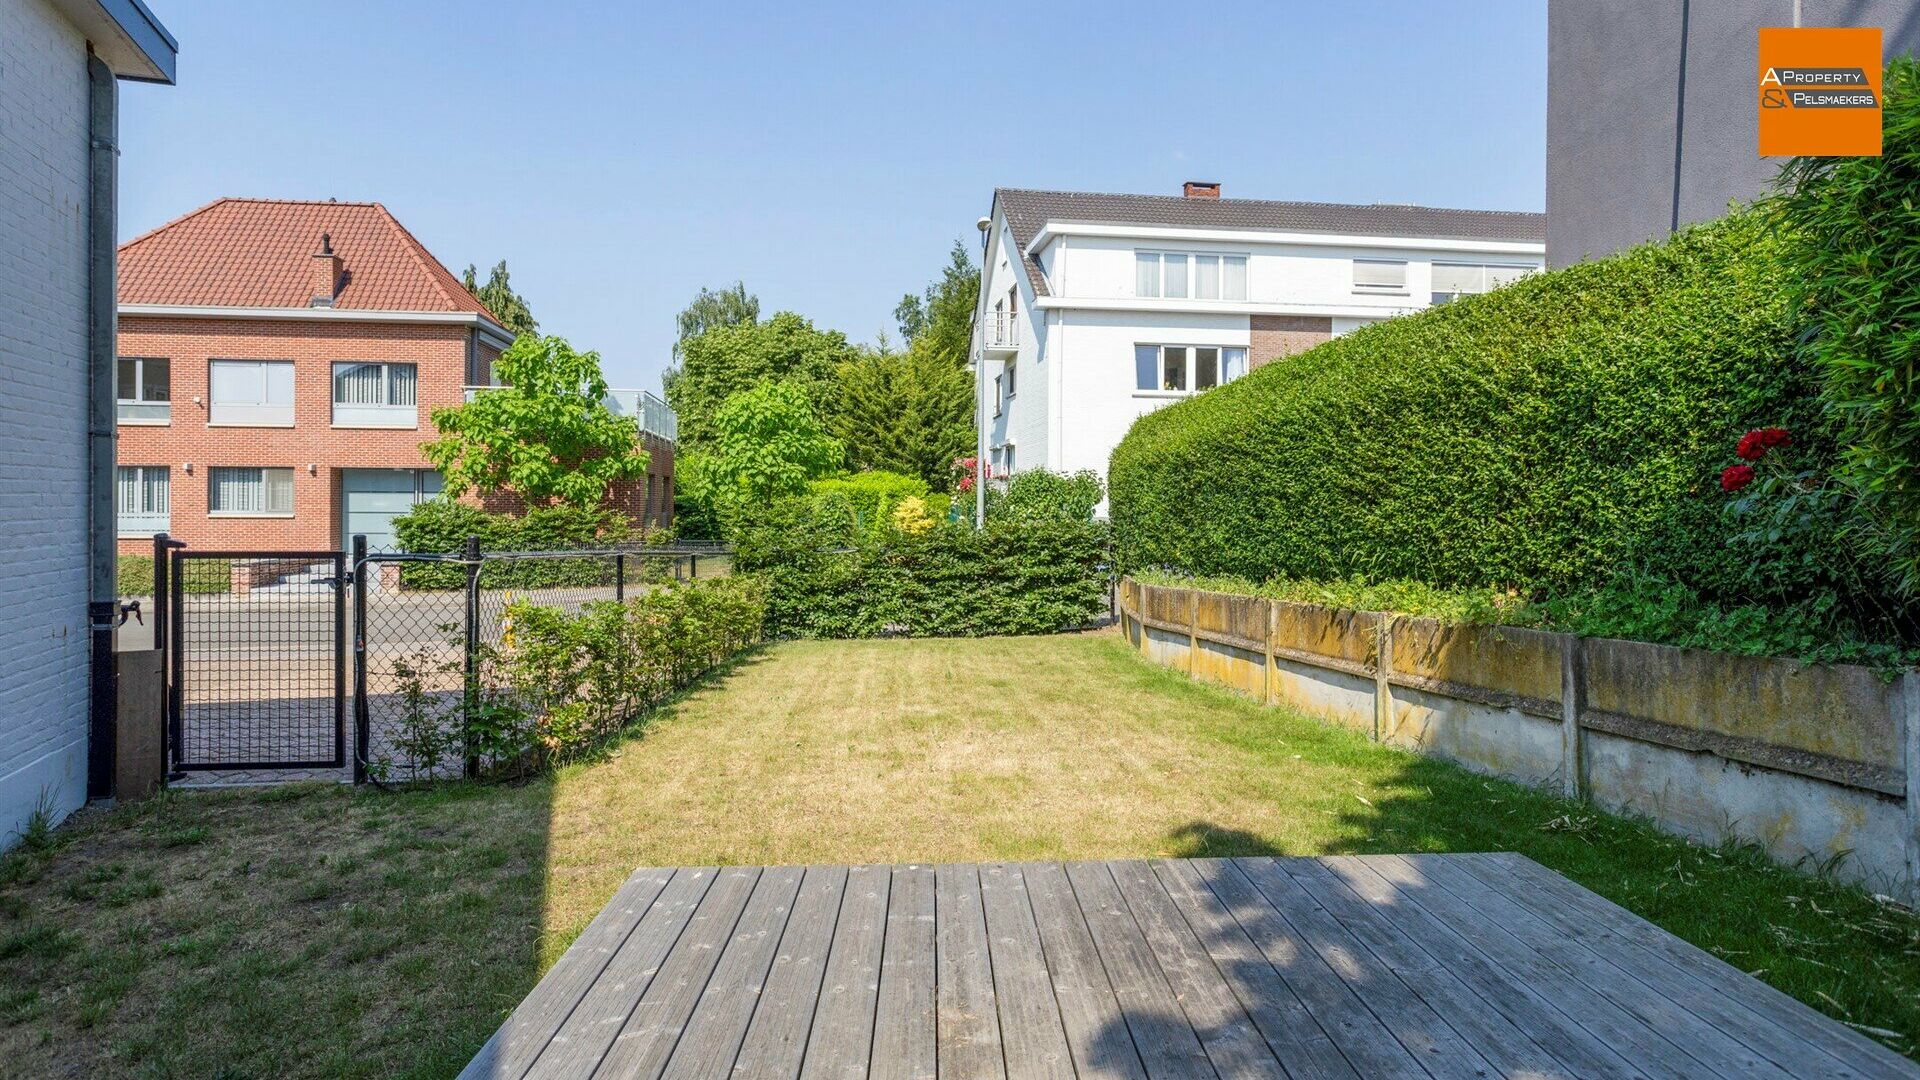 Investment Property for sale in HEVERLEE